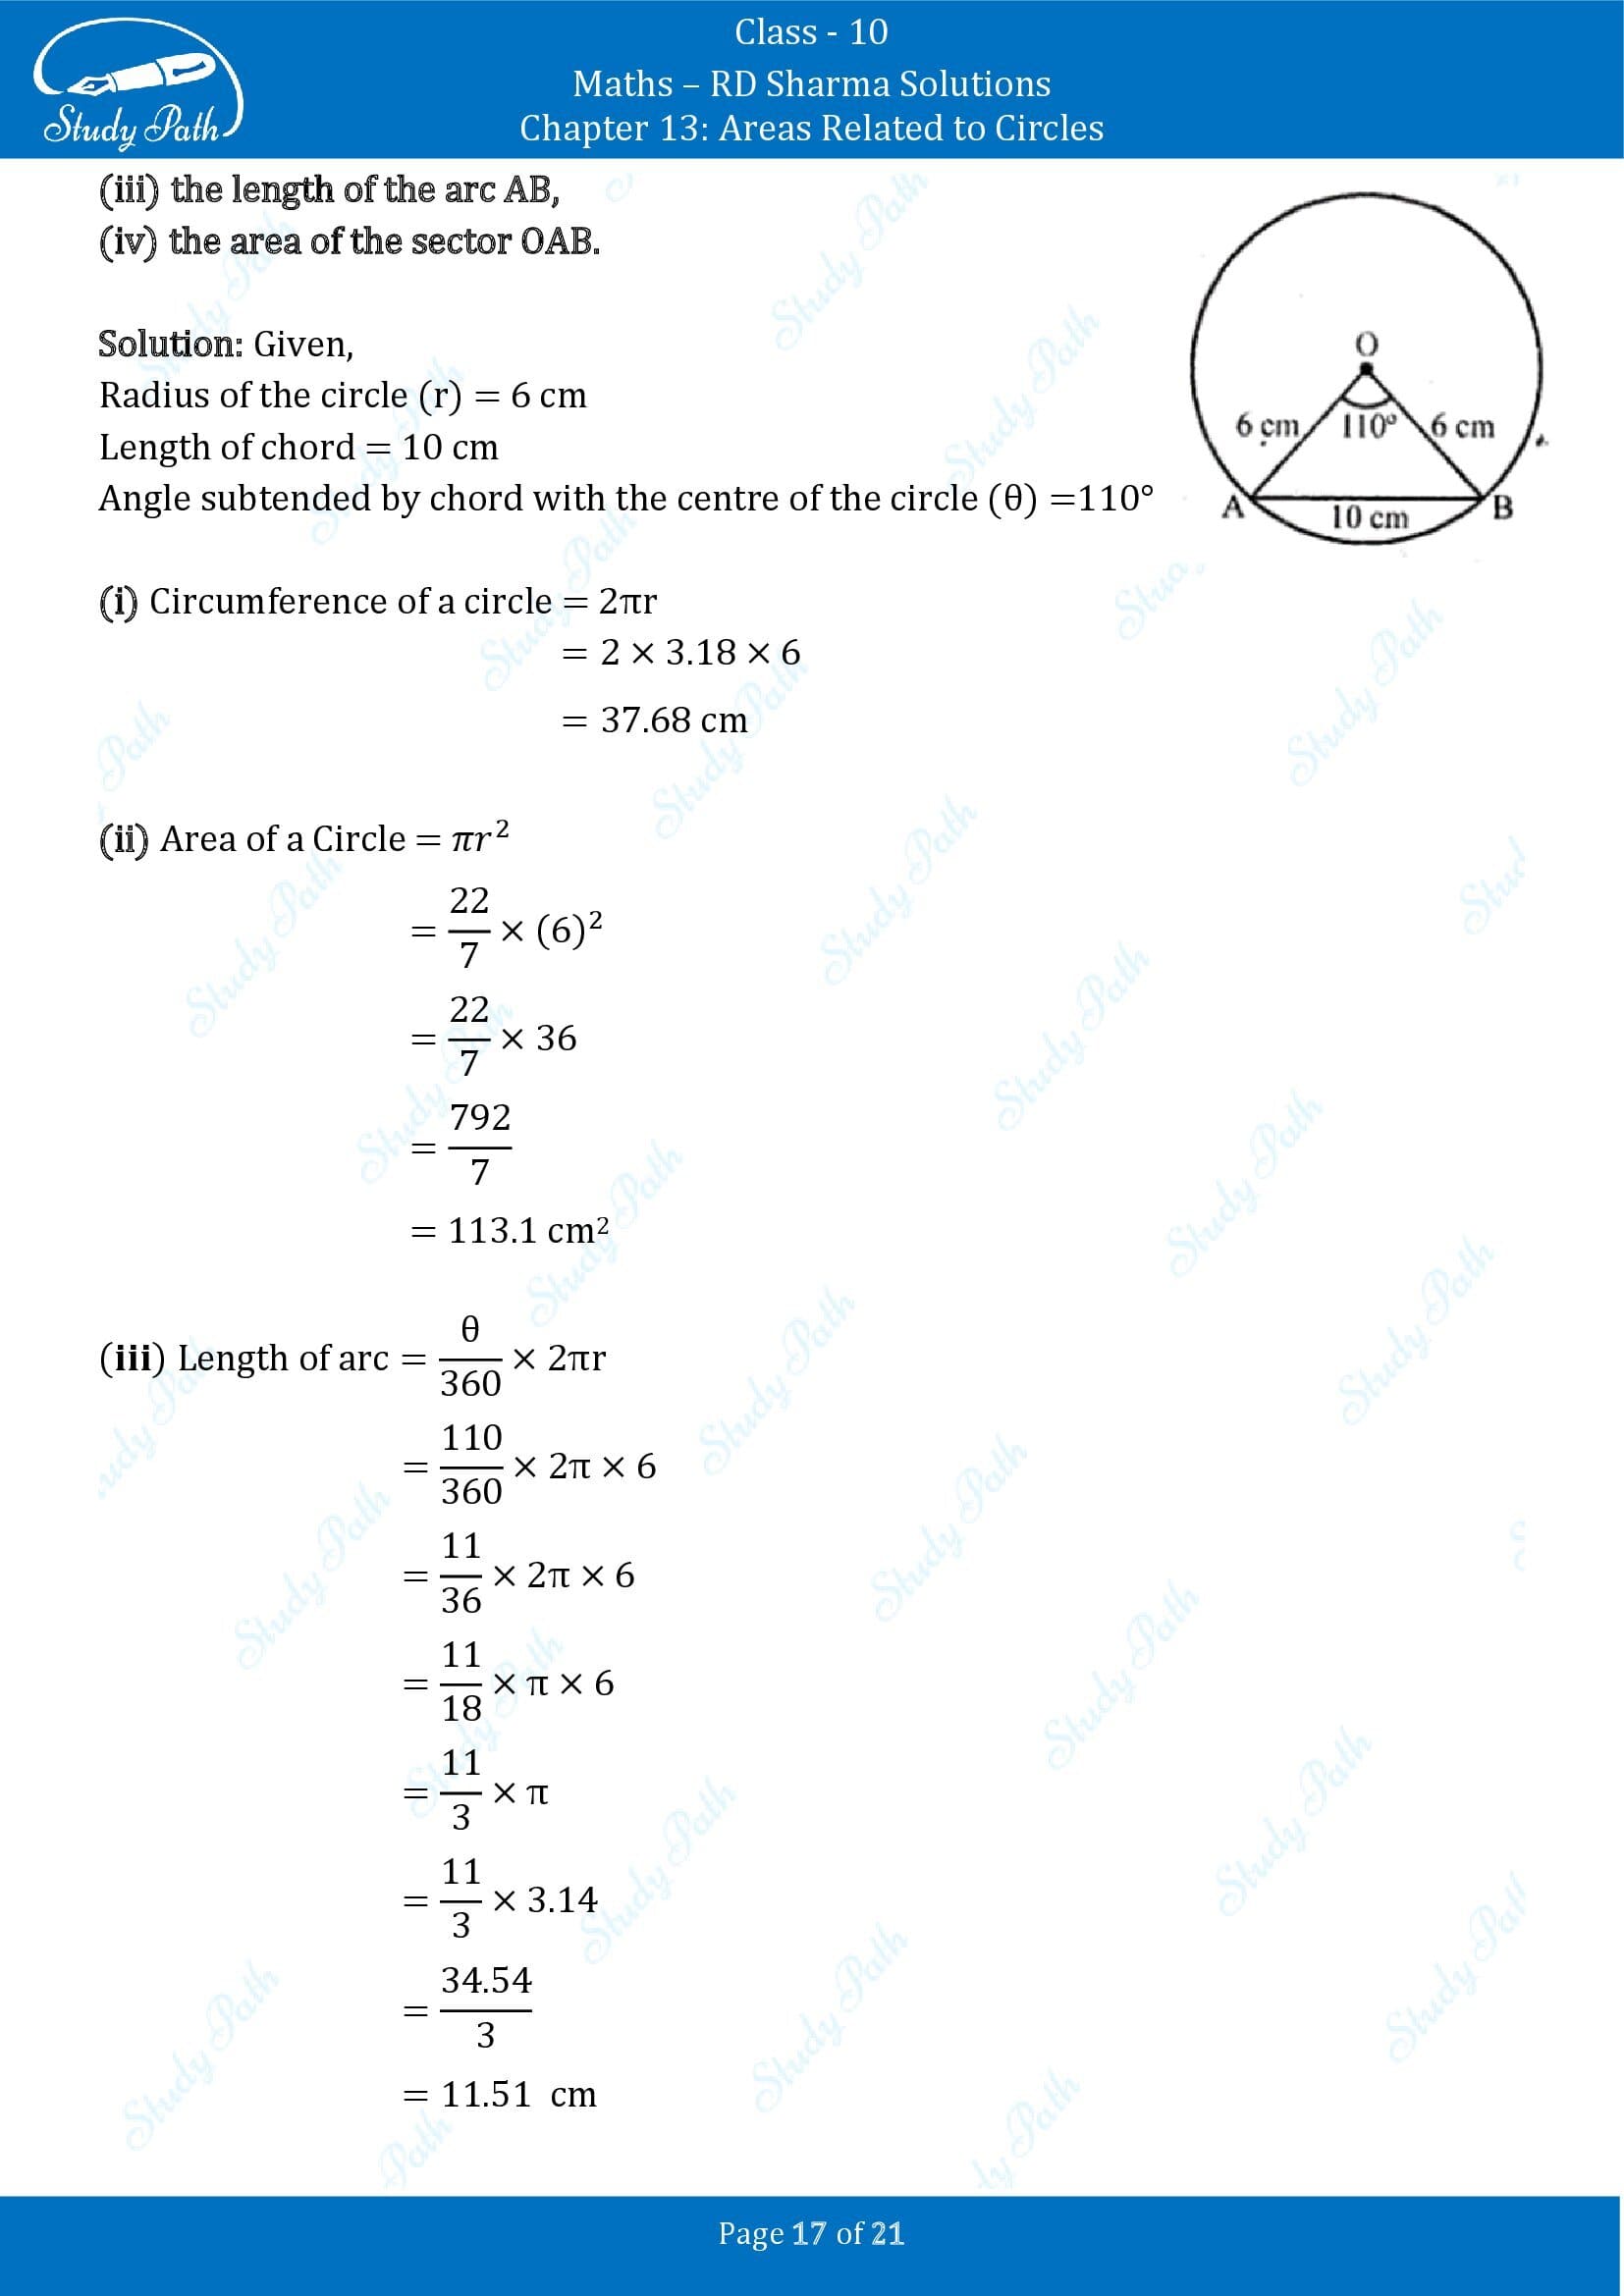 RD Sharma Solutions Class 10 Chapter 13 Areas Related to Circles Exercise 13.2 00017